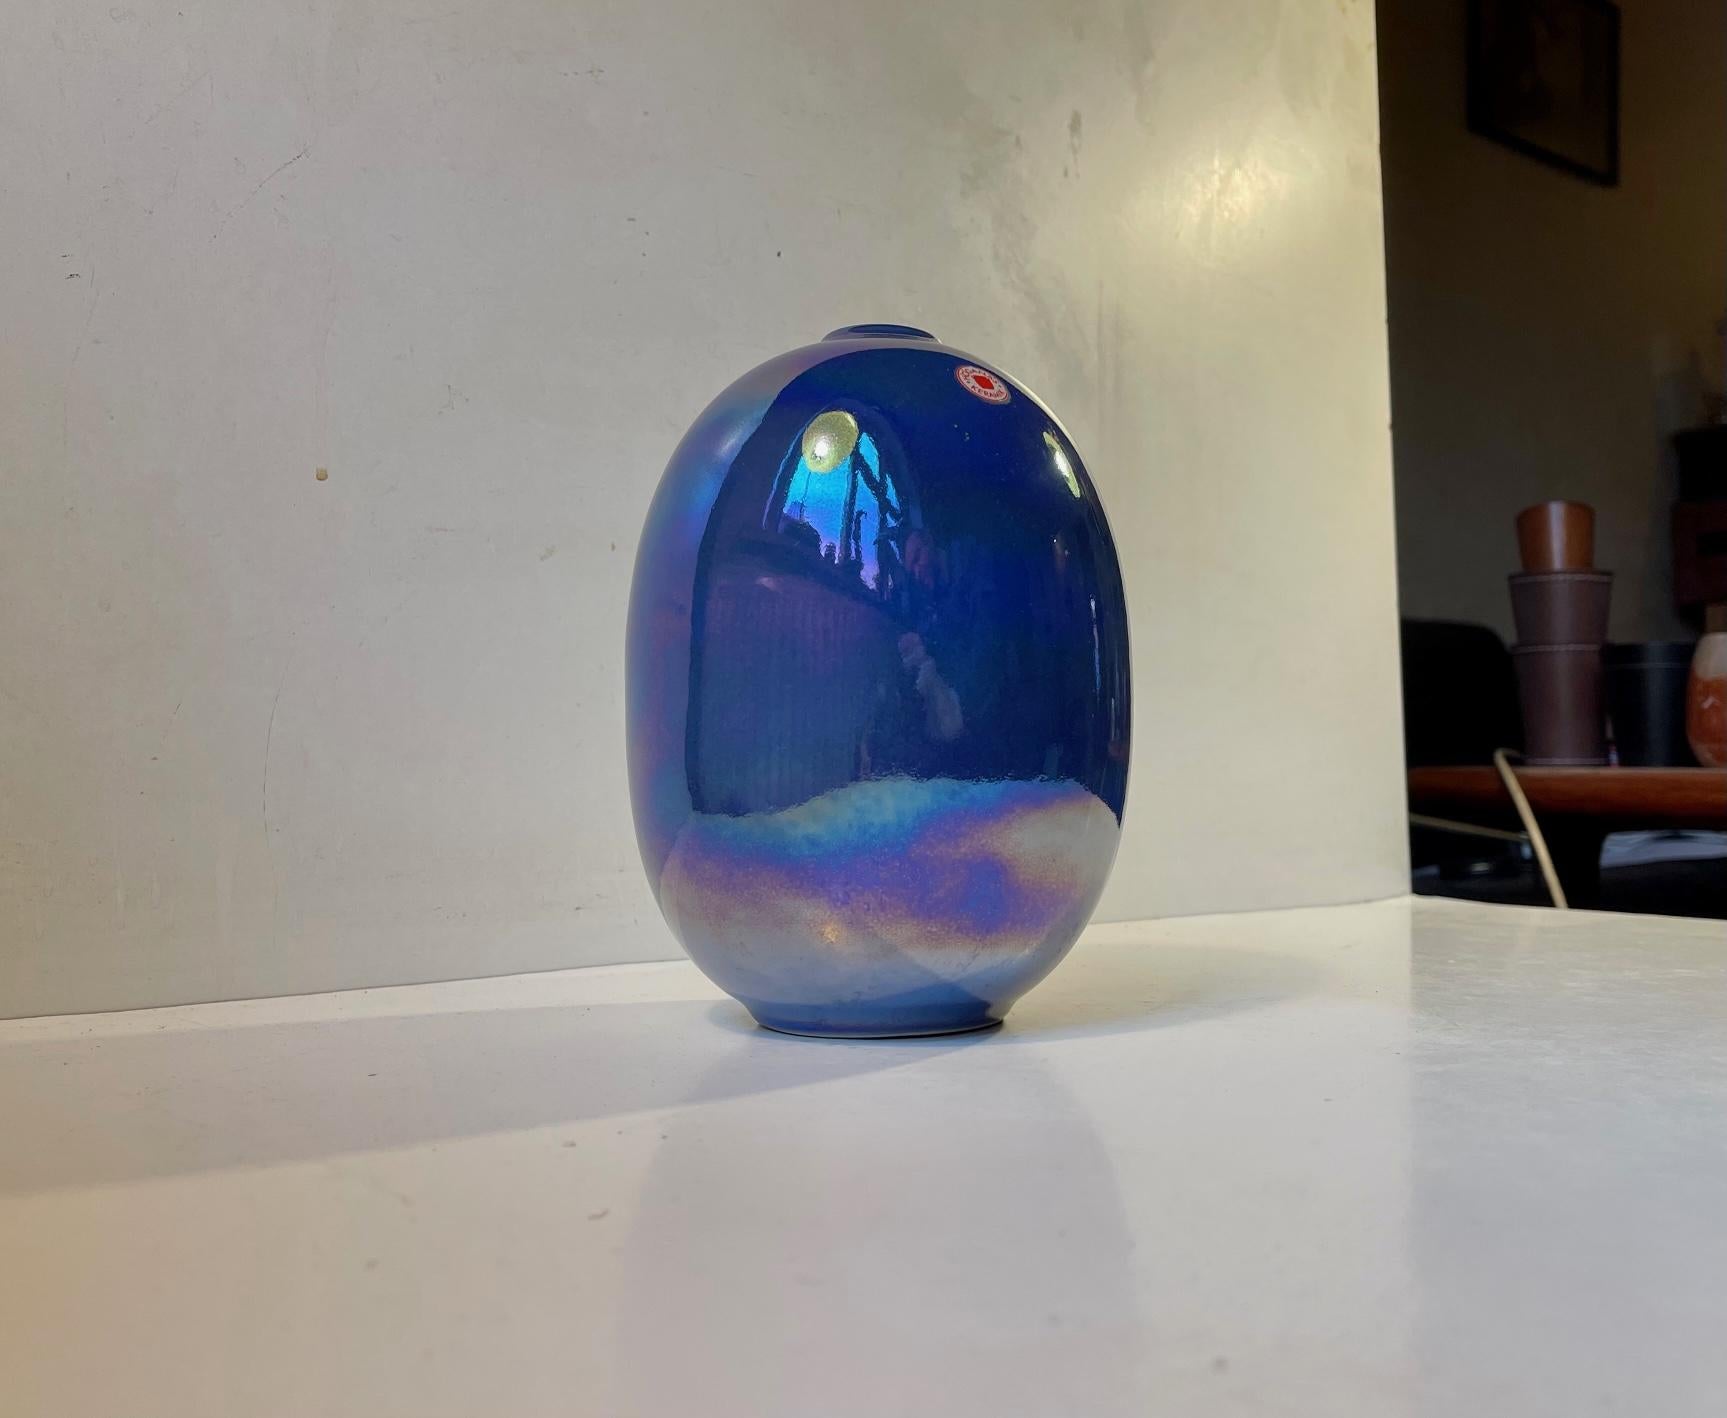 Mirror glazed Vase in an organic Egg shape. The high-gloss glaze is constantly changing colors depending on the light. It was manufactured and designed by Höganäs in Sweden during the 1970s. It is stamped by the manufacturer to the base.